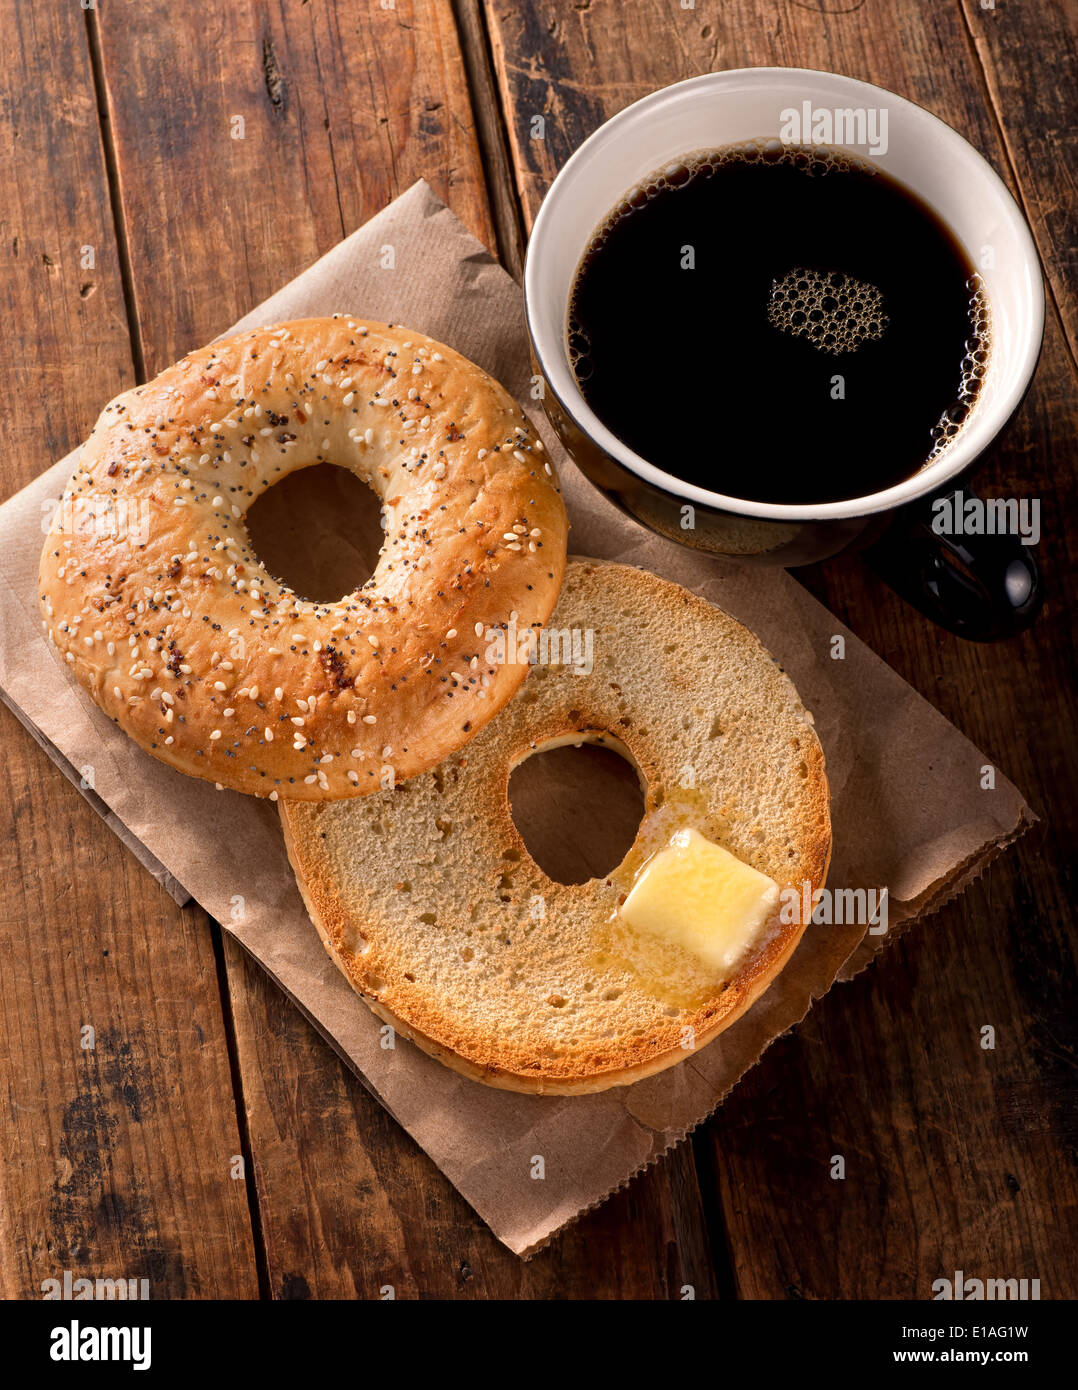 A delicious toasted everything bagel with melted butter and black coffee. Stock Photo